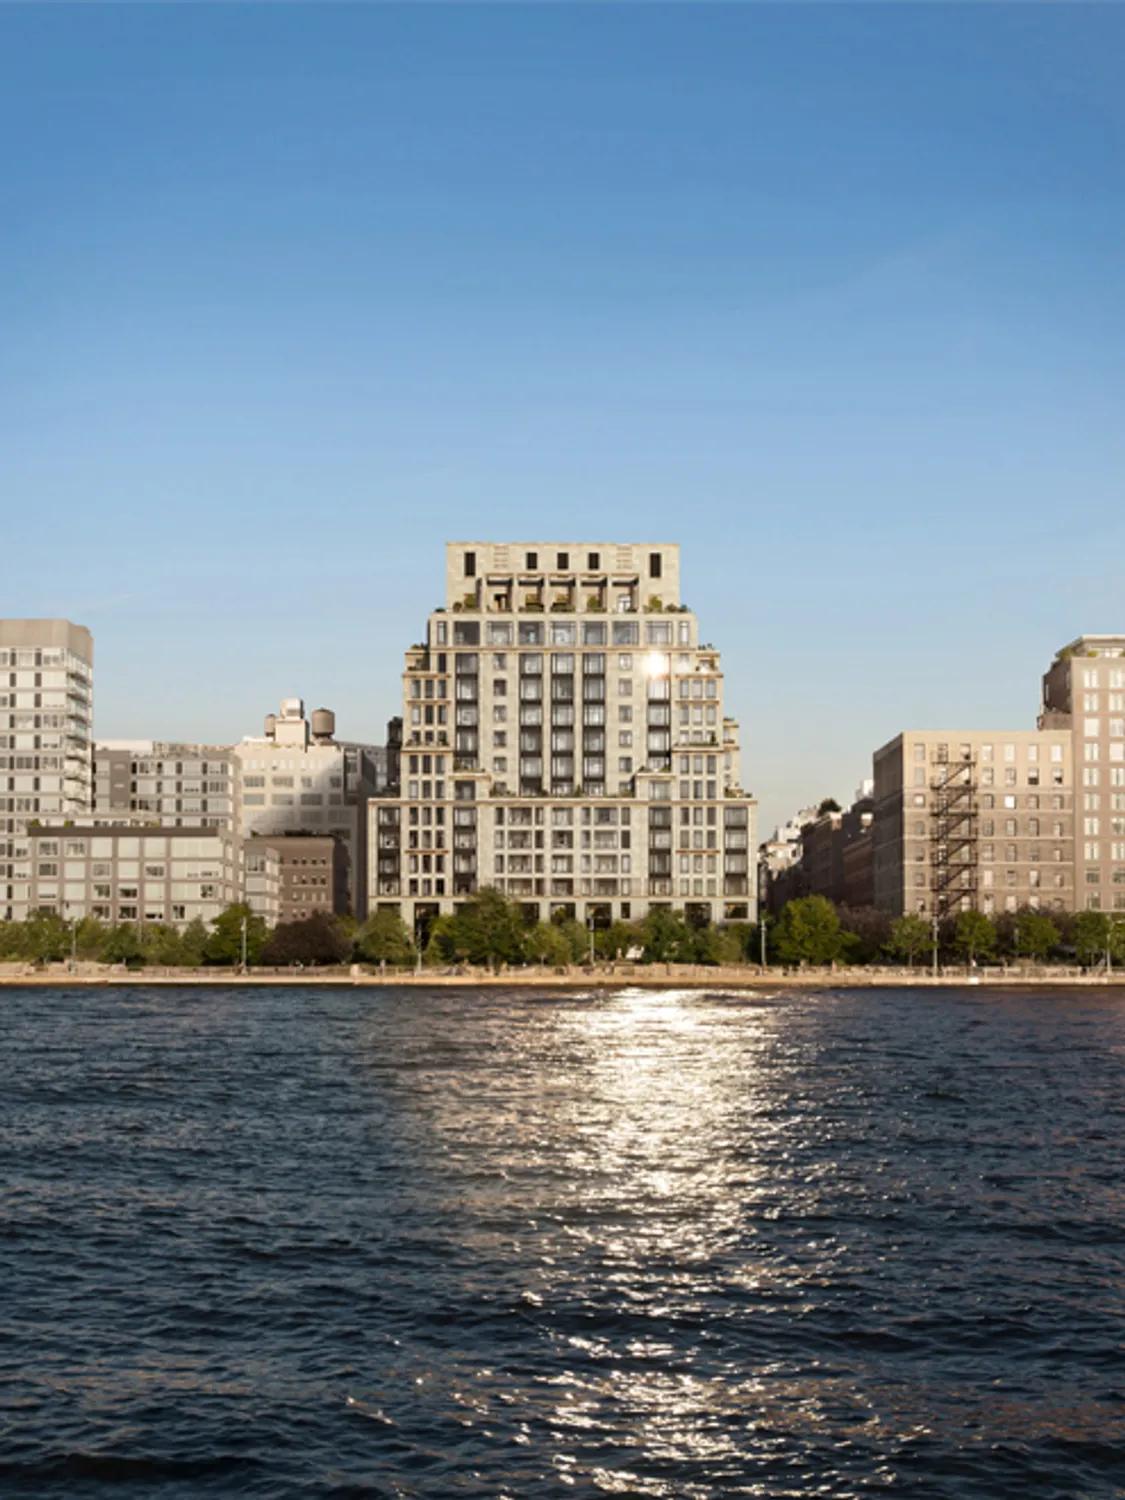 70 Vestry sits on the shore of the Hudson